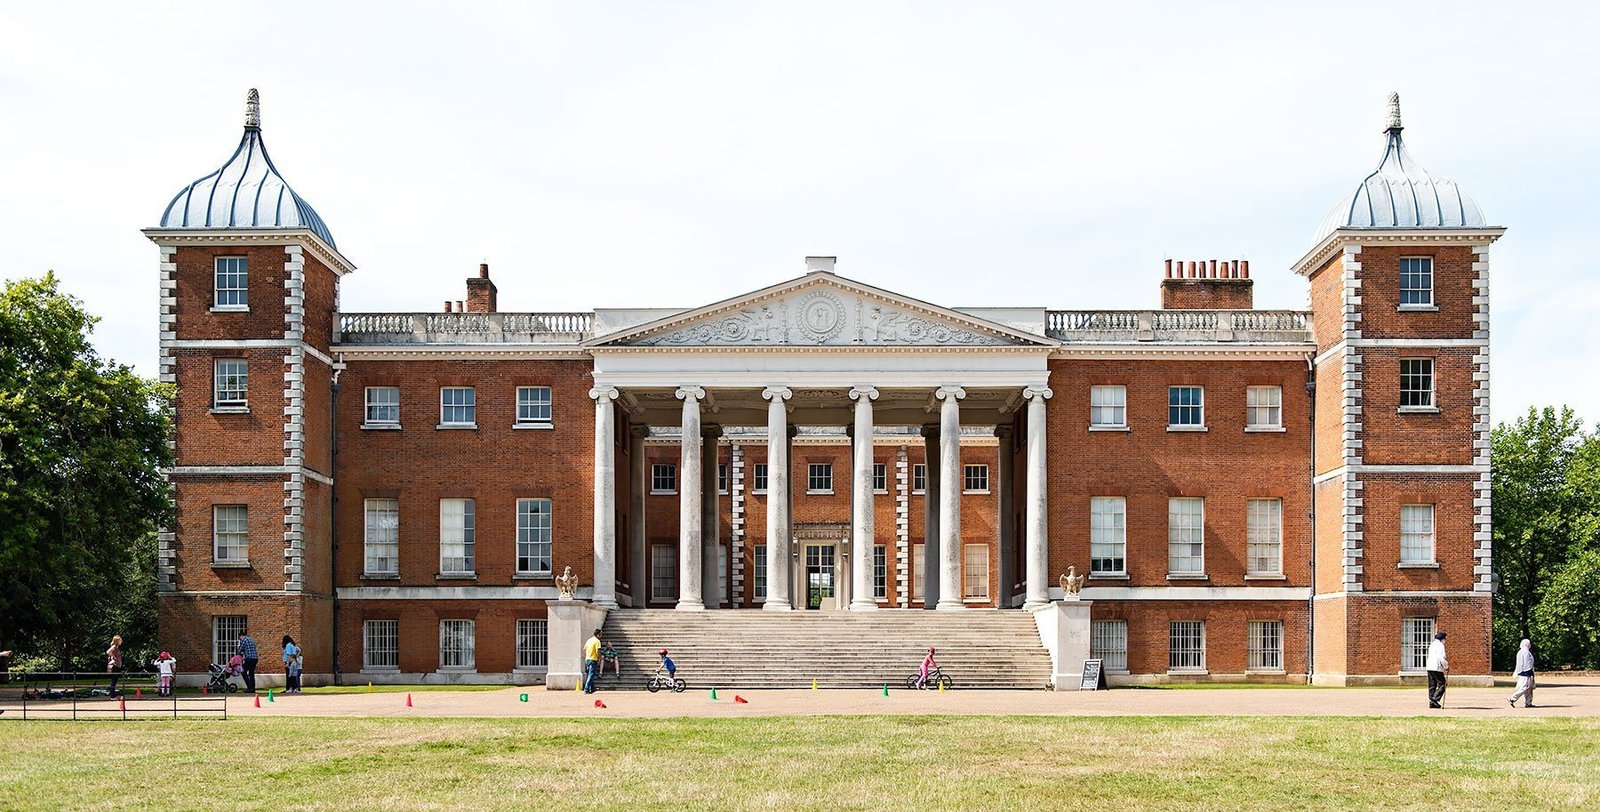 Step into 18th century London at Osterley Park